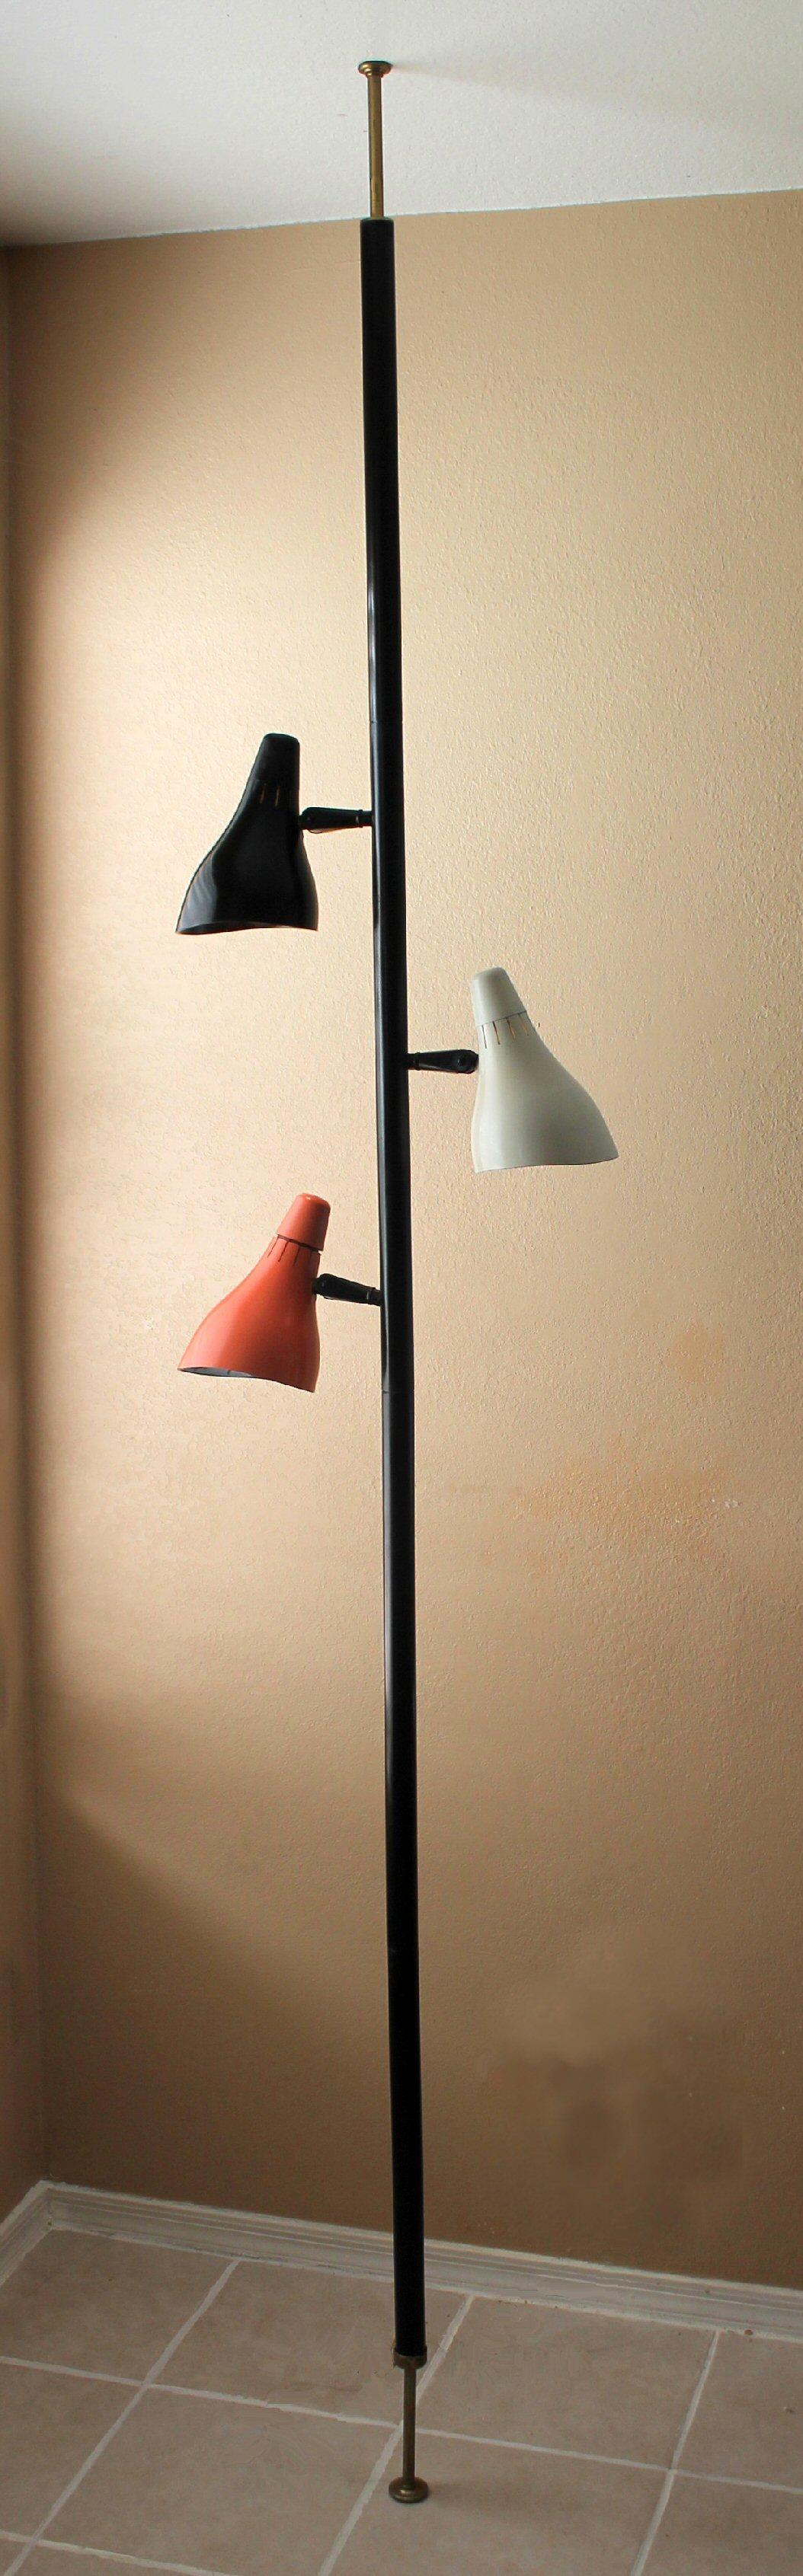 STUNNING & RARE! 


1956
MID CENTURY MODERN
LIGHTOLIER
TENSION POLE LAMP!
THREE SHADES
ORANGE WHITE BLACK

GERALD THURSTON DESIGN

FITS 8 FT. CEILING


Mid Century Pole lamps are one of the most fun interior design additions one can make to a